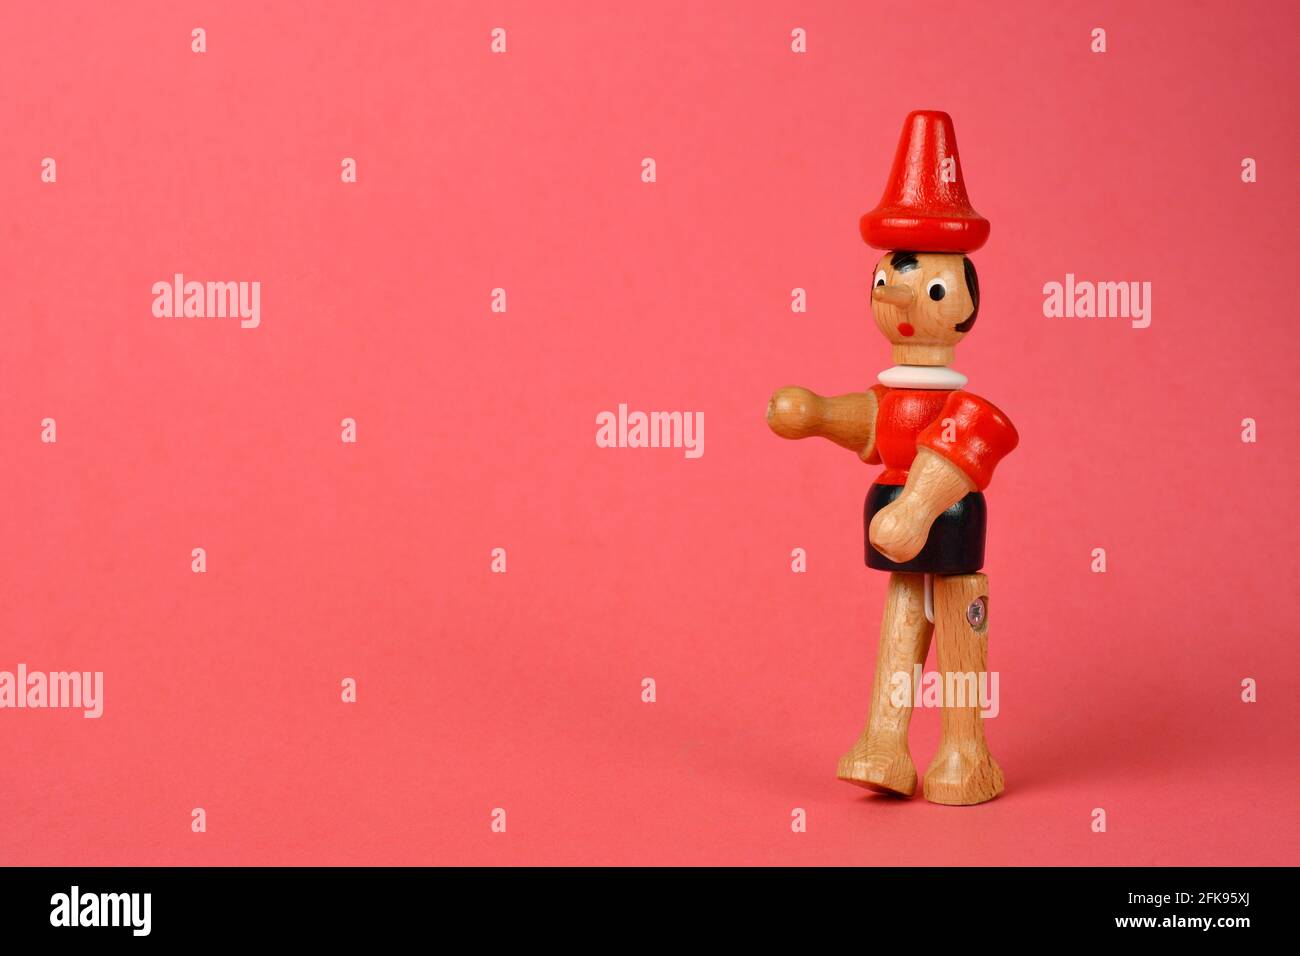 Wooden puppet depicting Pinocchio walking on a pink background Stock Photo